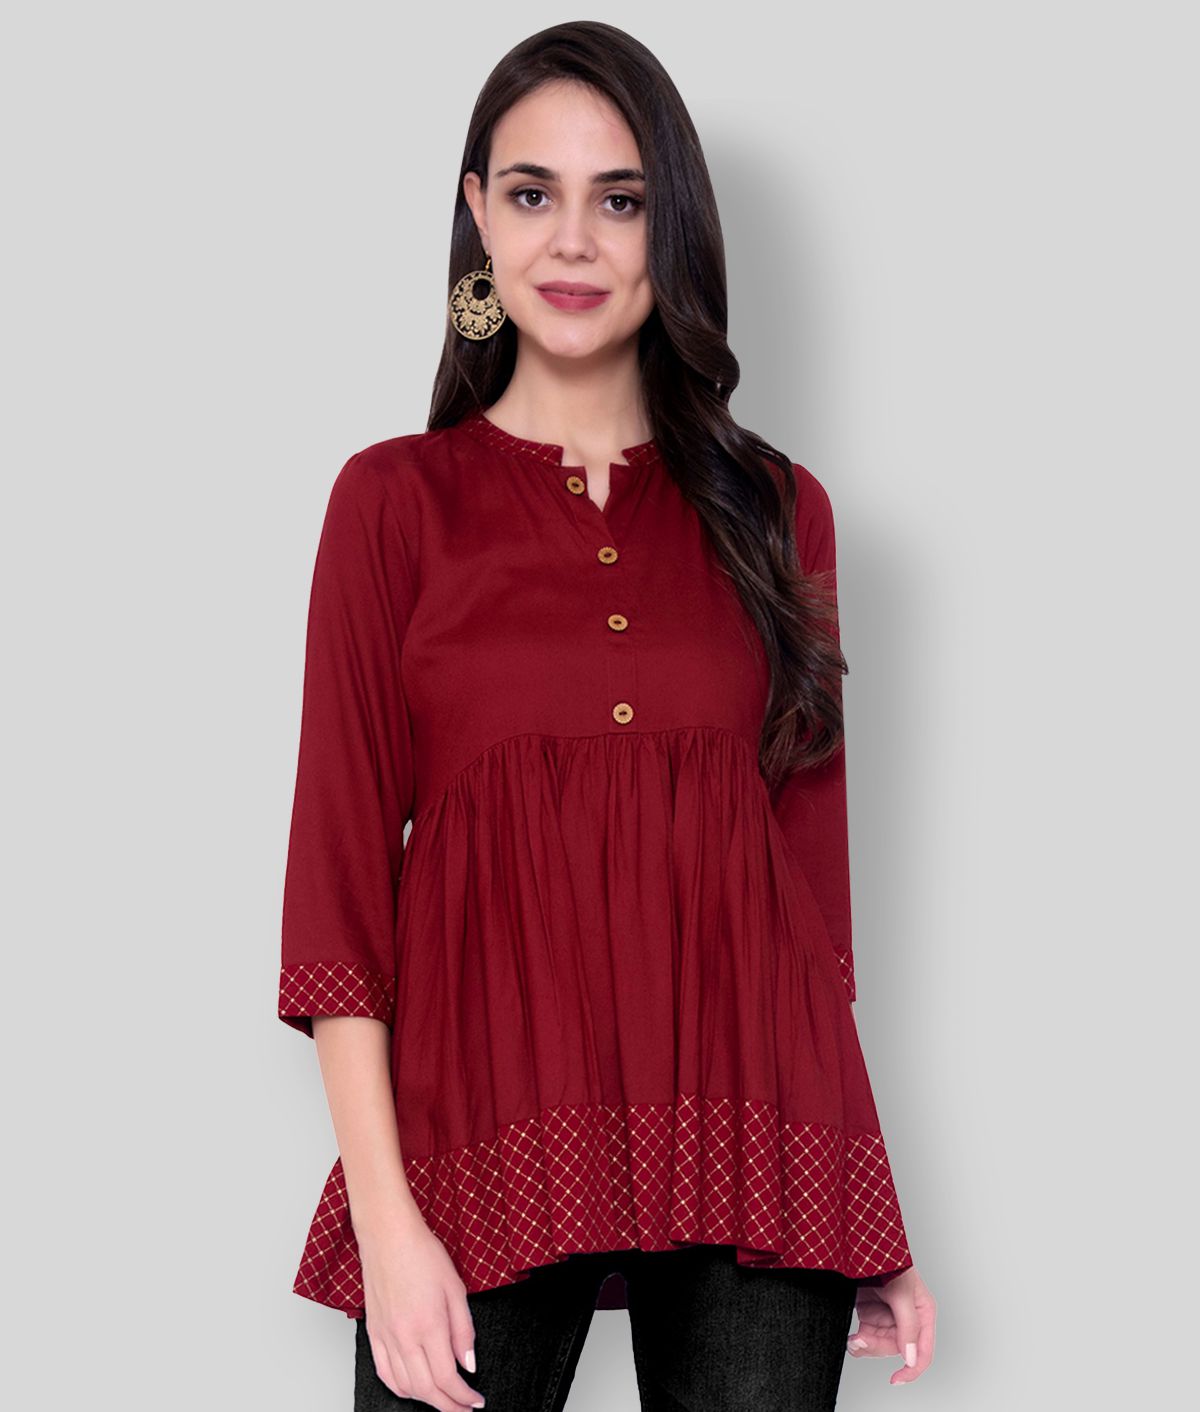     			GOD BLESS - Maroon Rayon Women's Tunic ( Pack of 1 )